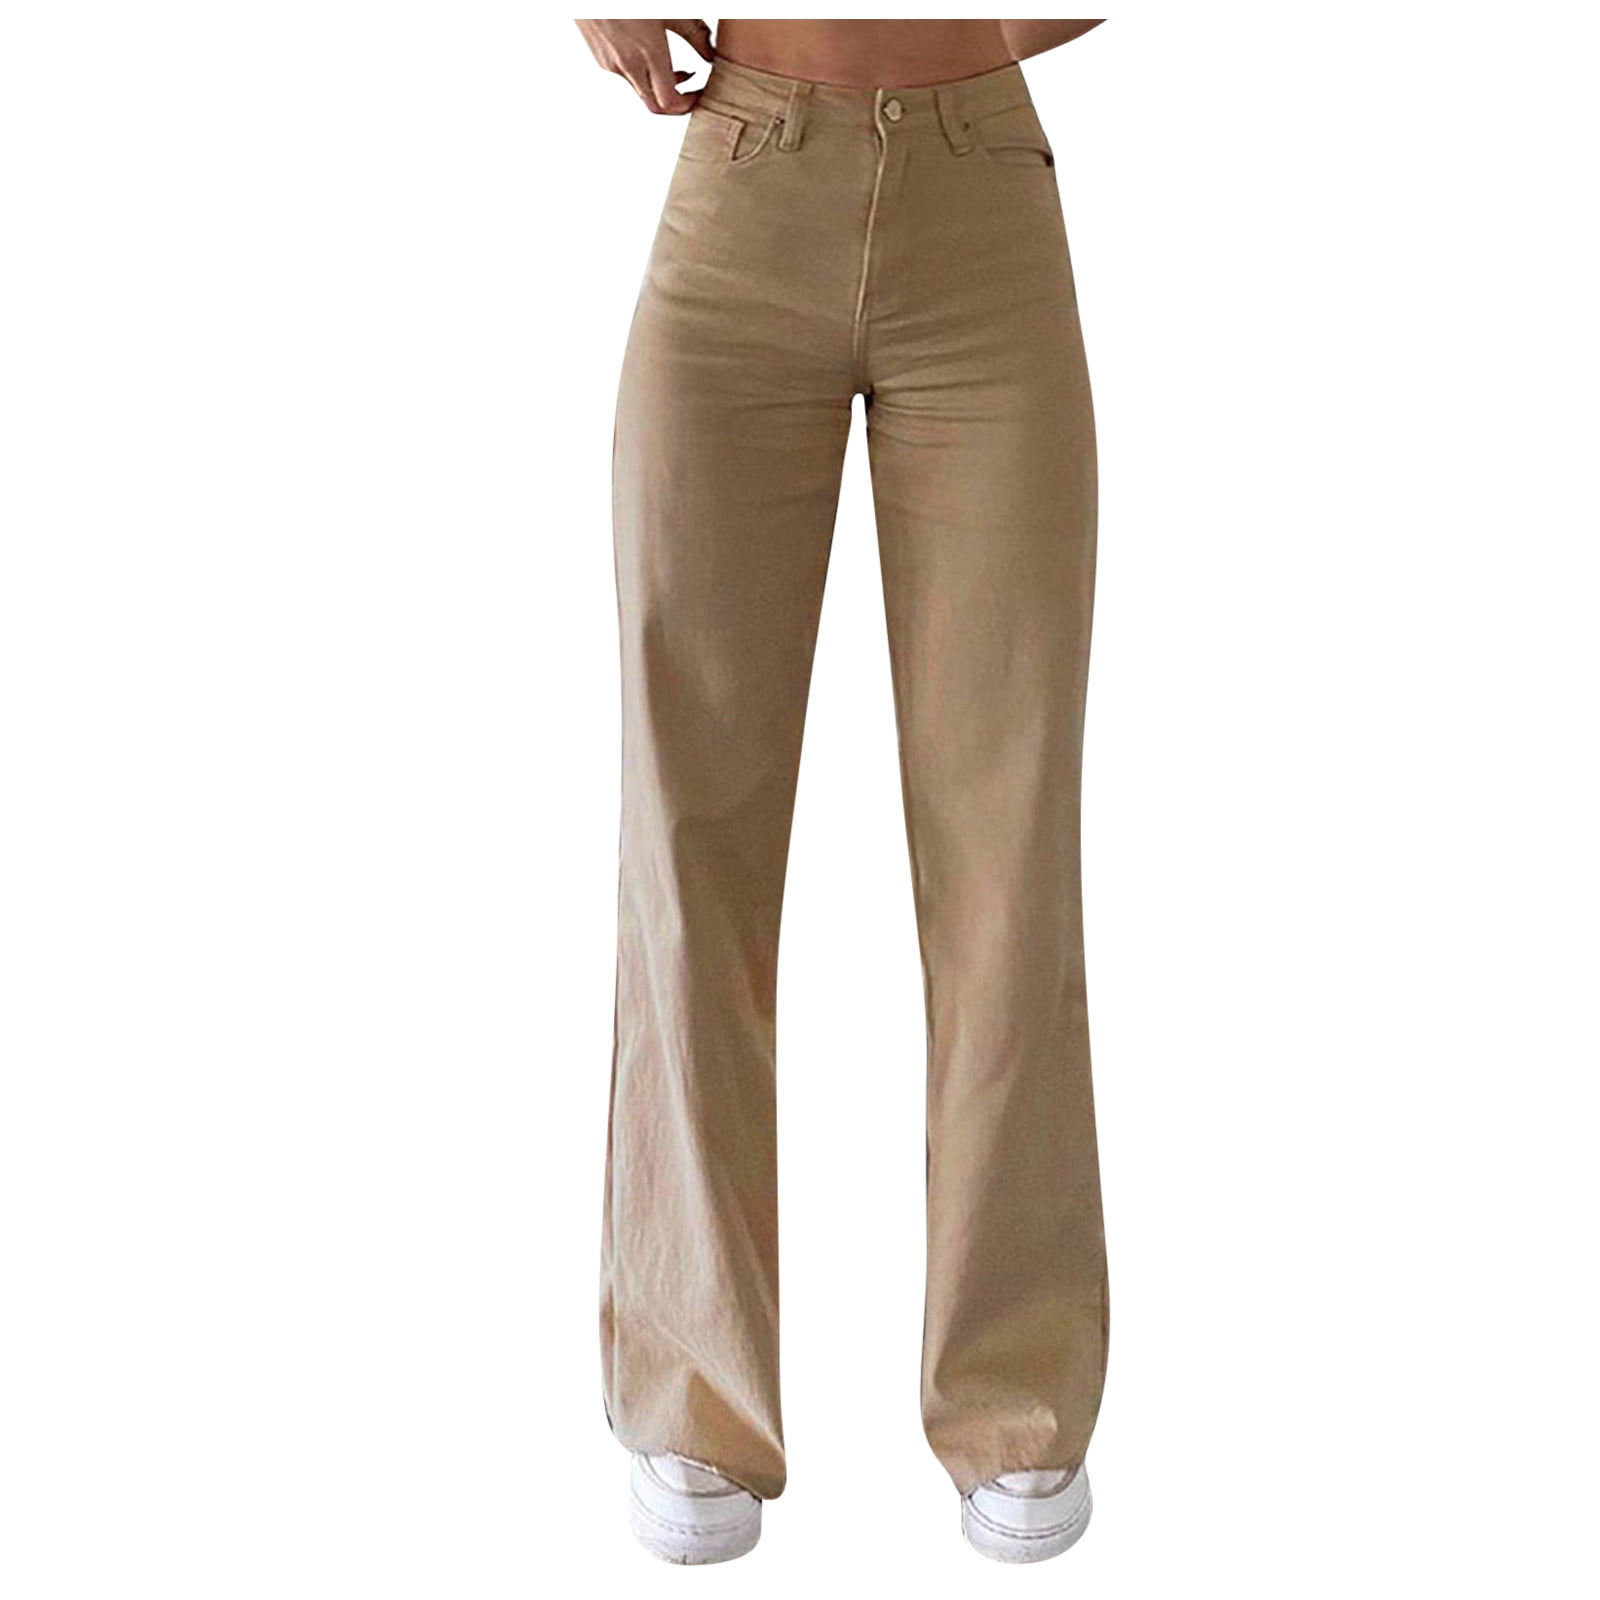 Tangnade autumn and winter casual trousers for India